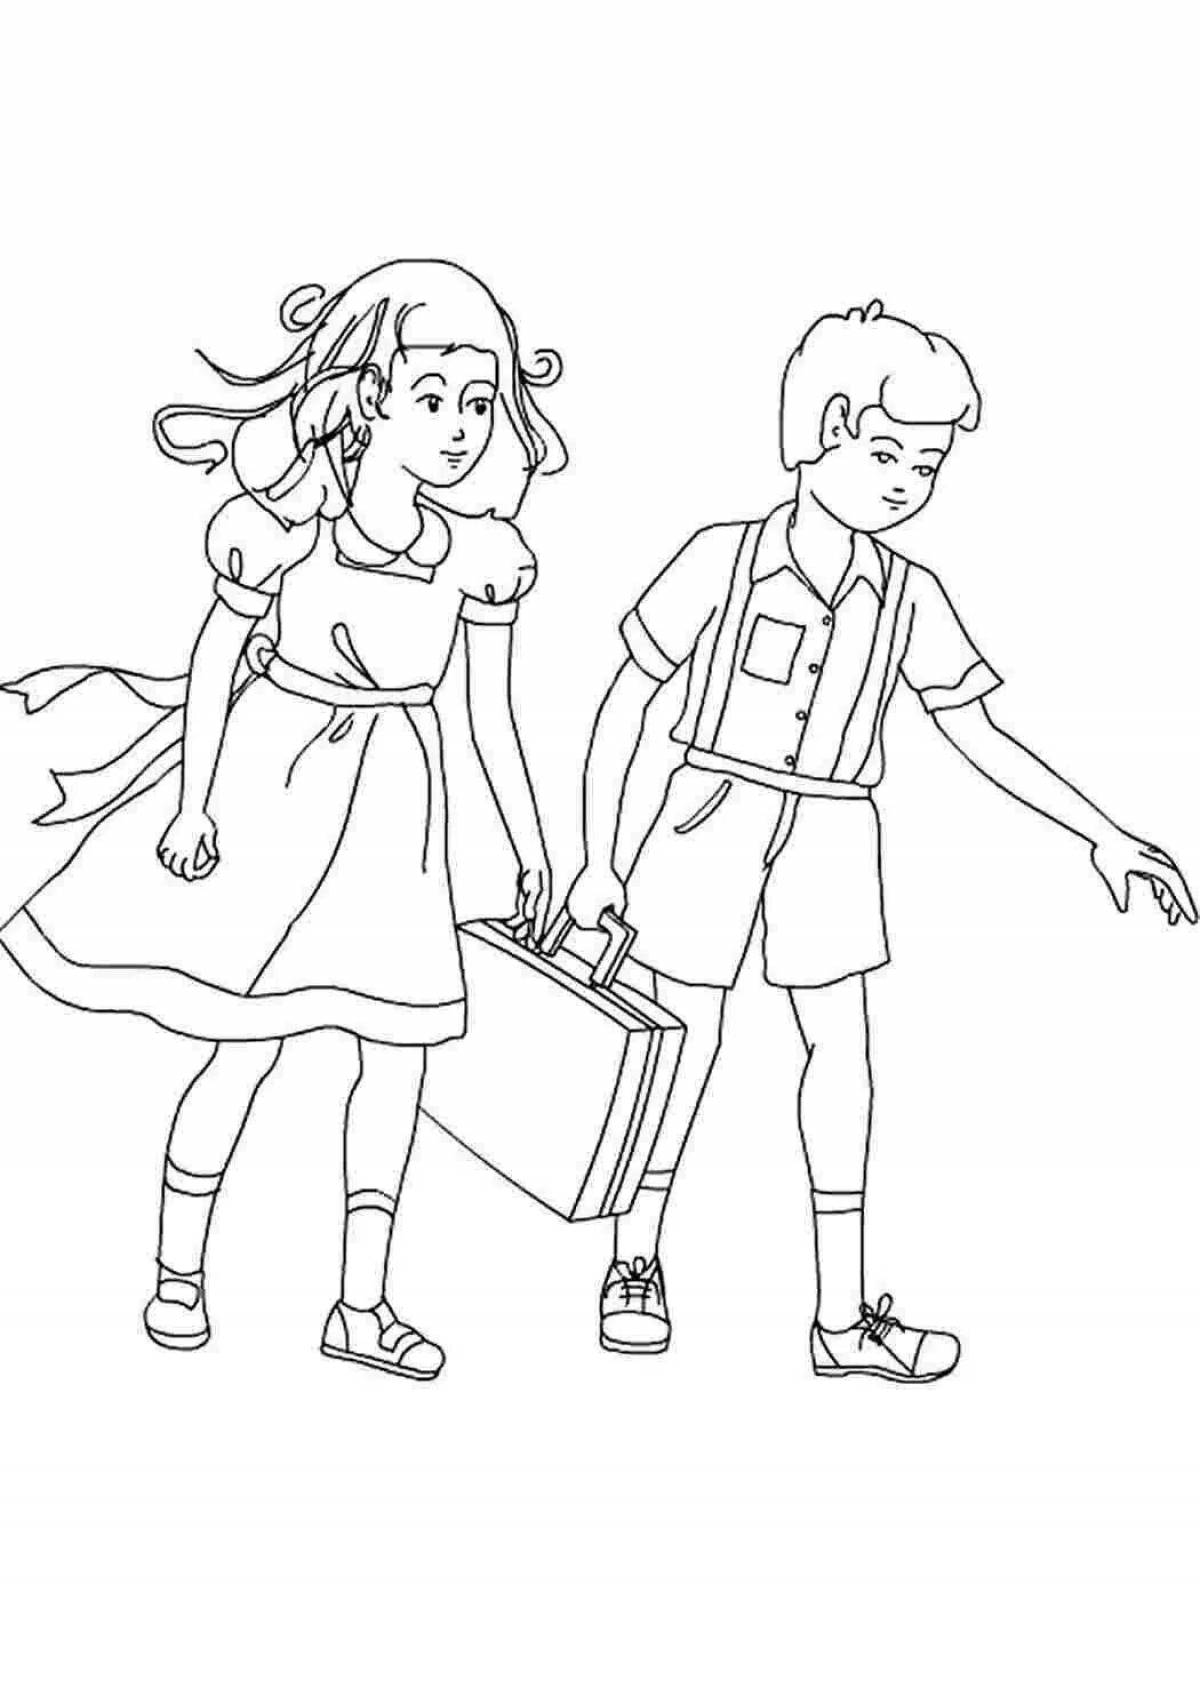 Animated coloring pages for schoolchildren